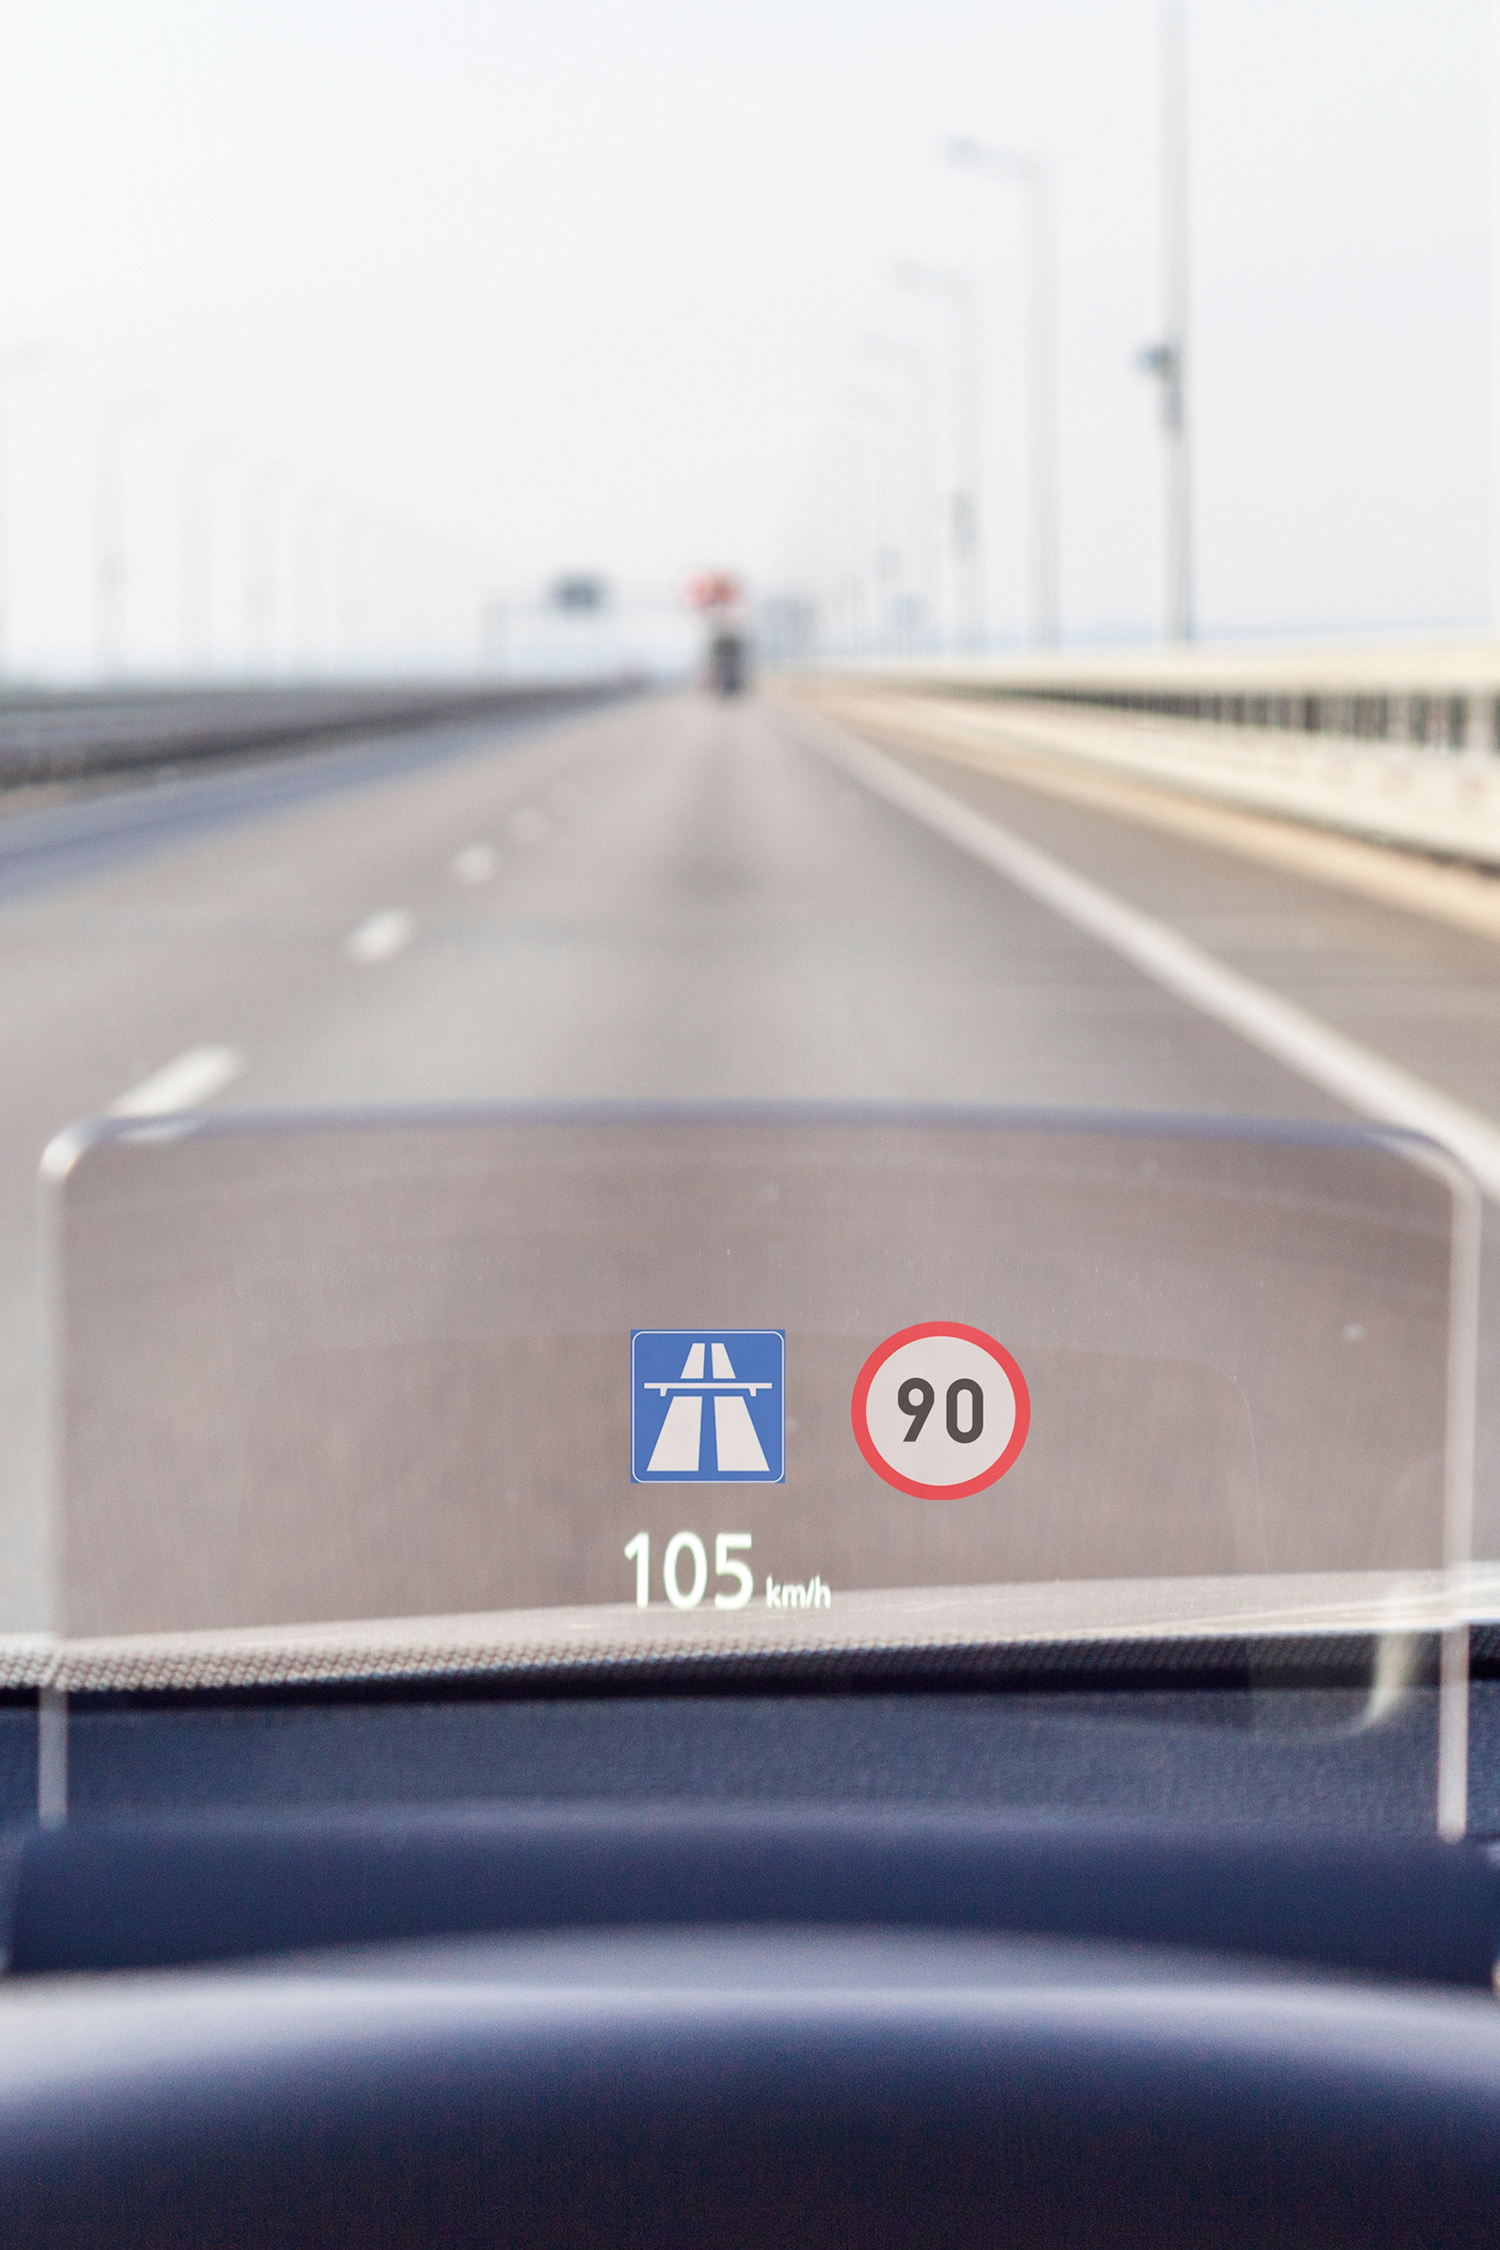 Features of Combined Head-up Display